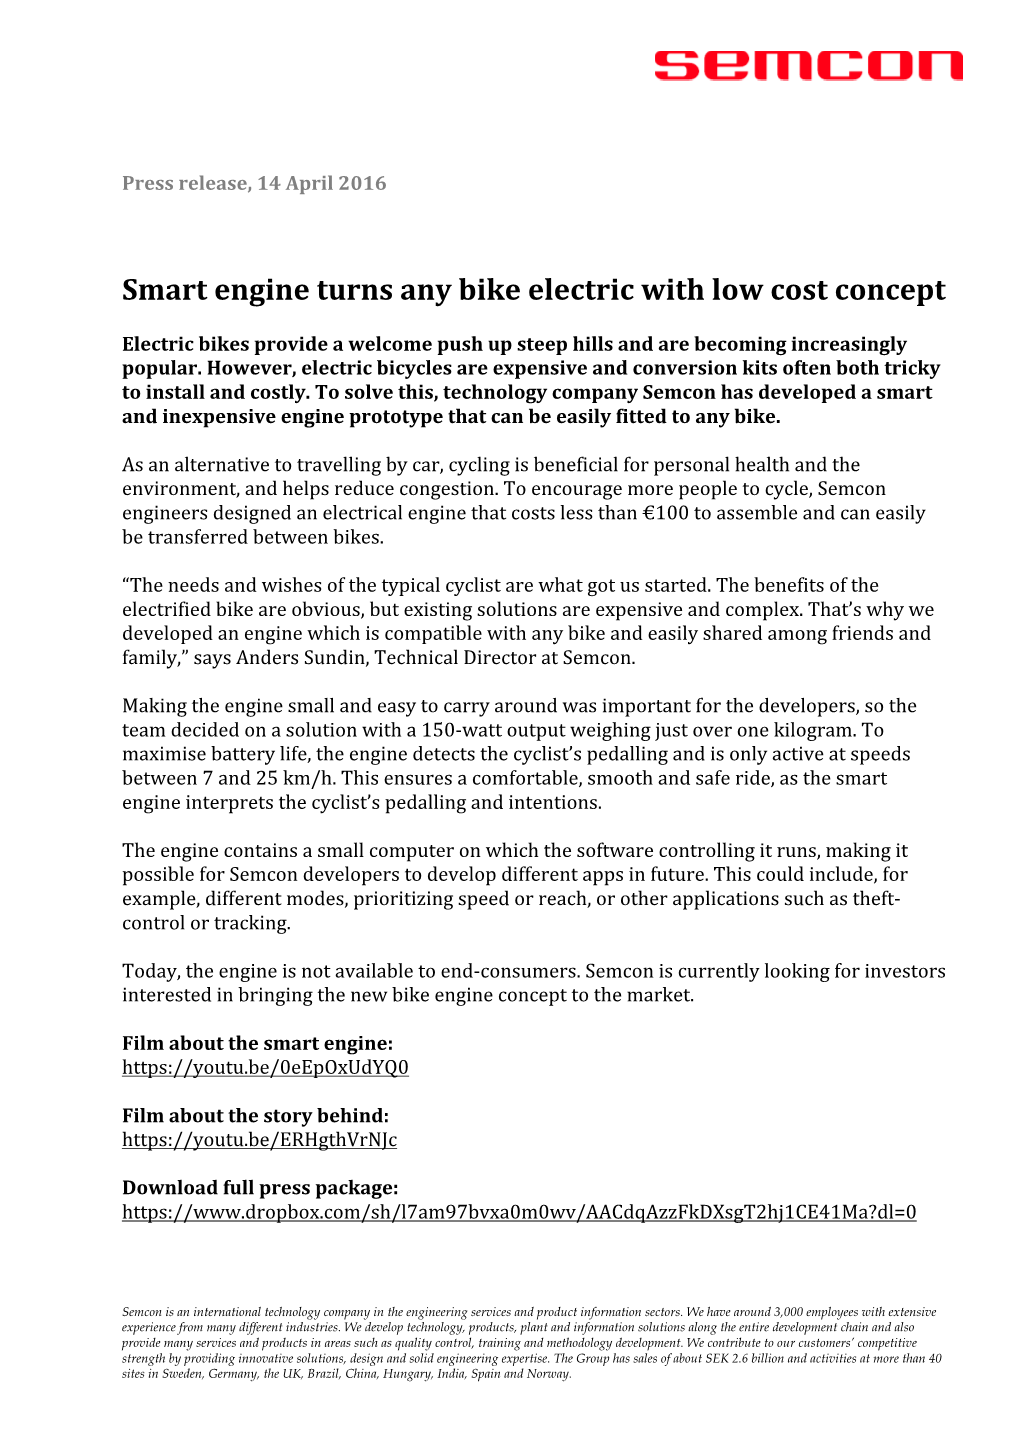 Smart Engine Turns Any Bike Electric with Low Cost Concept